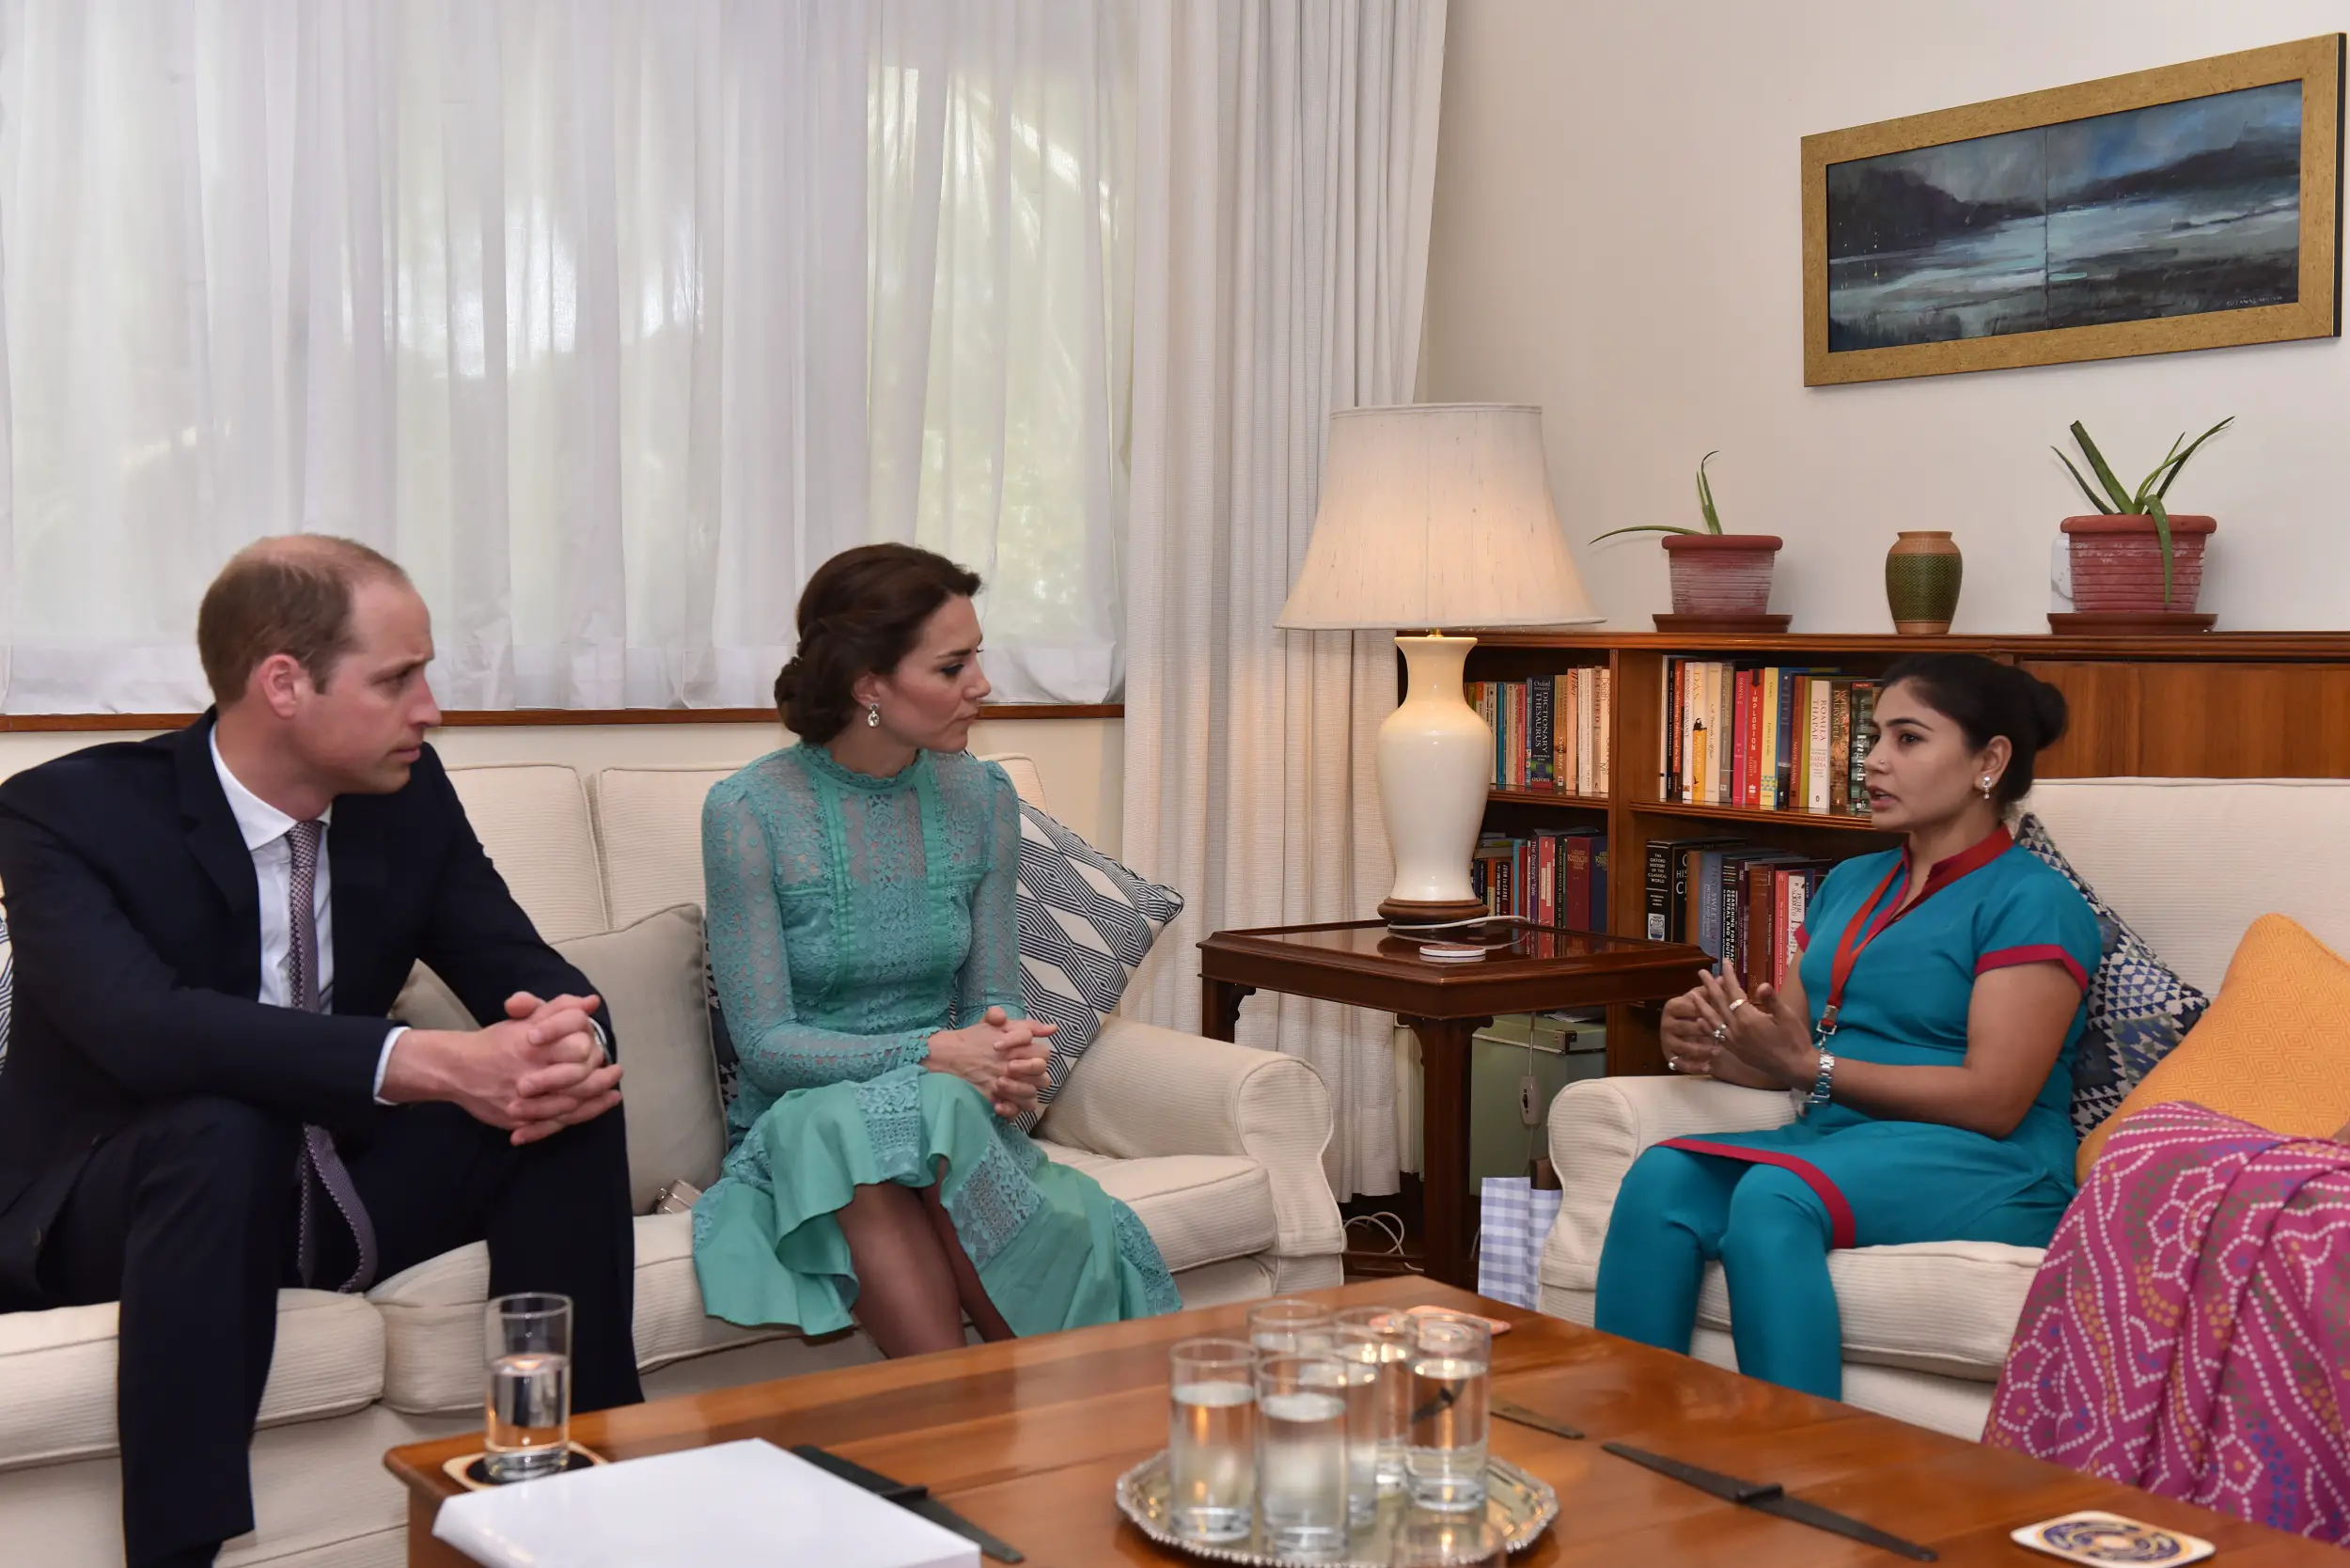 The Duke and Duchess of Cambridge met with Women NGO during India visit in 2016